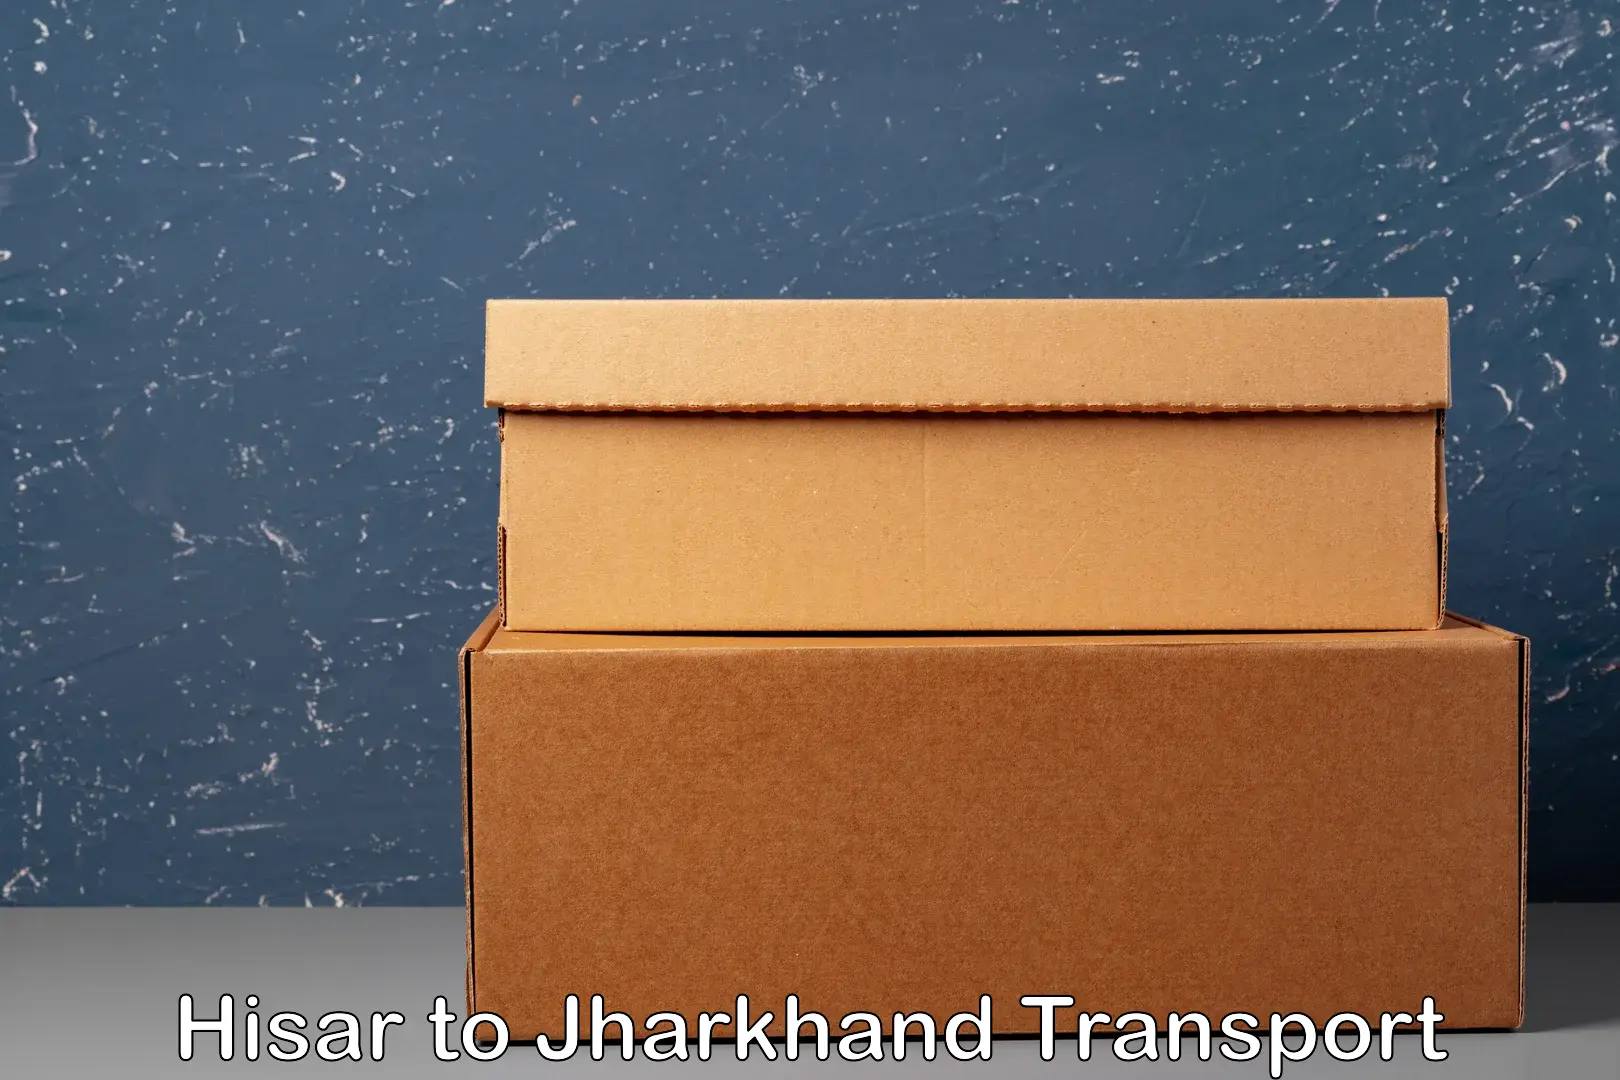 Online transport service Hisar to Jharkhand